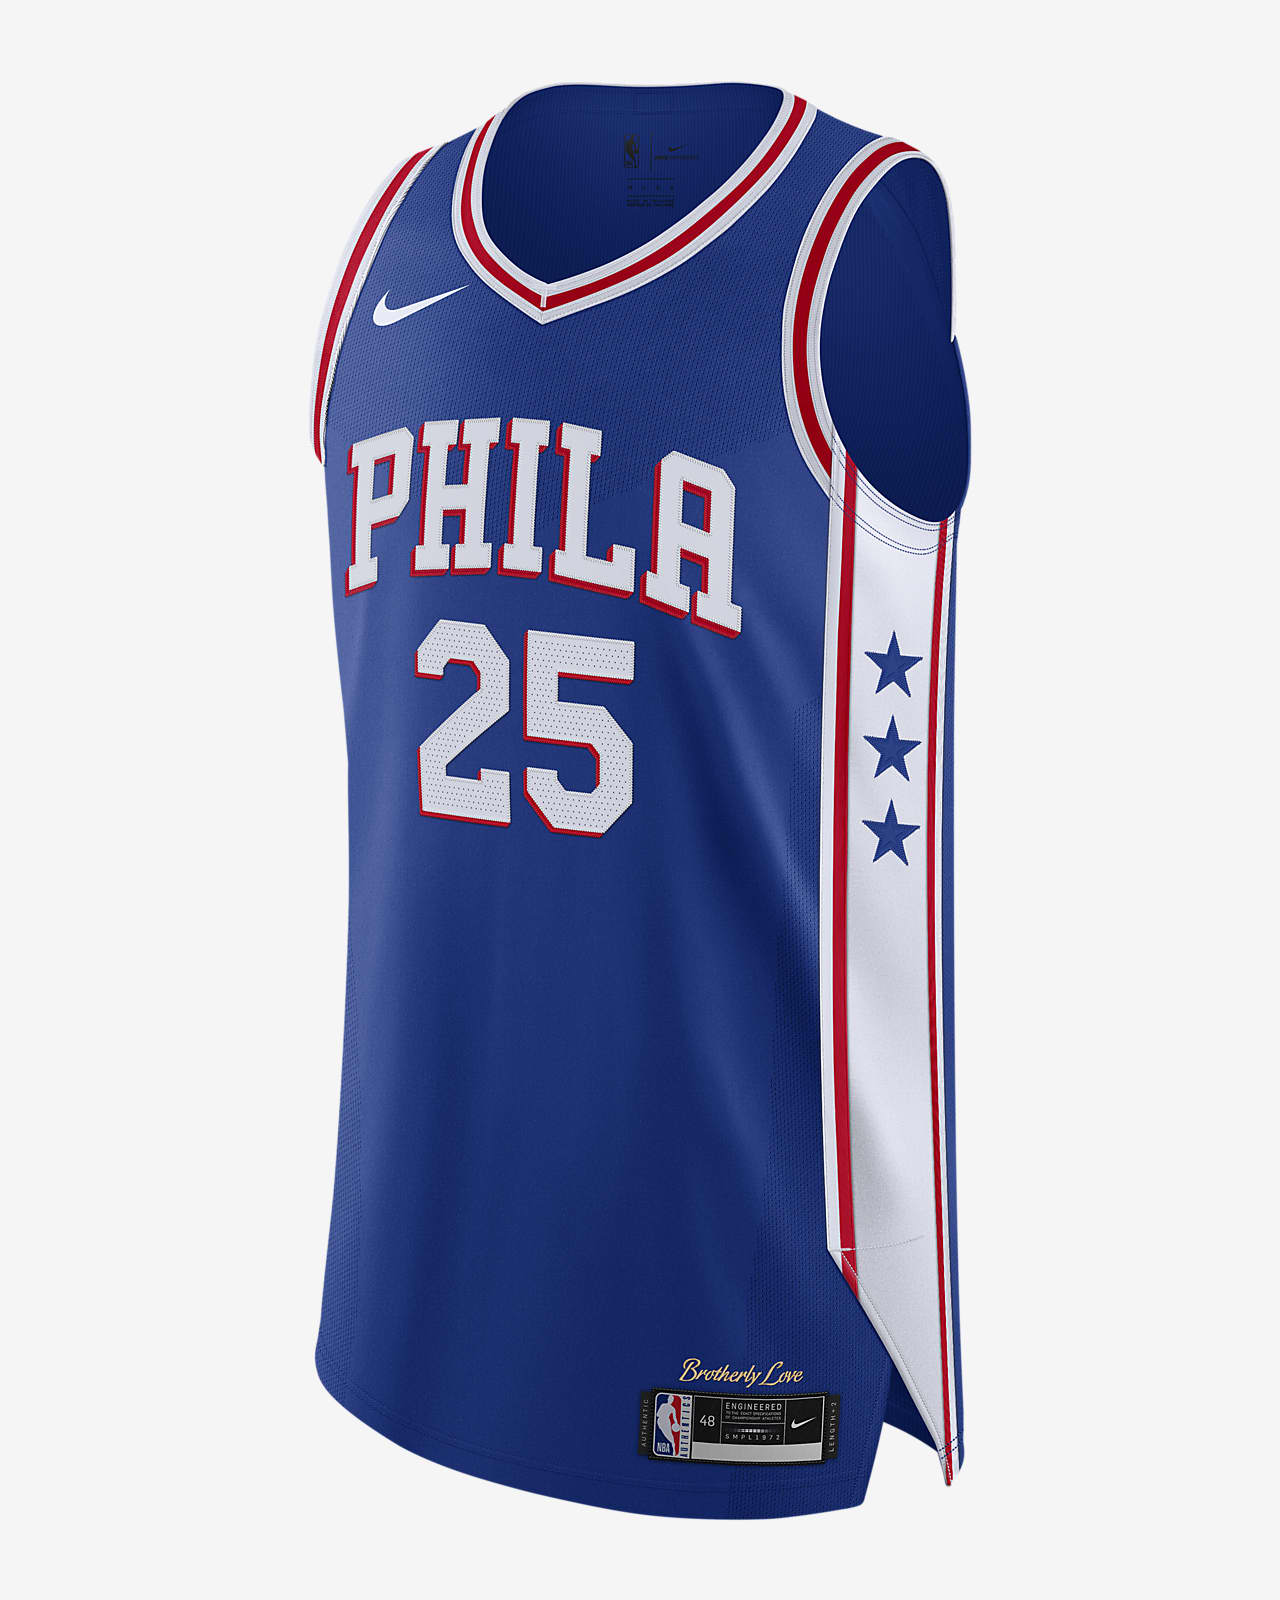 Ben Simmons 76ers Icon Edition 2020 Nike Authentic Jersey. Nike.com